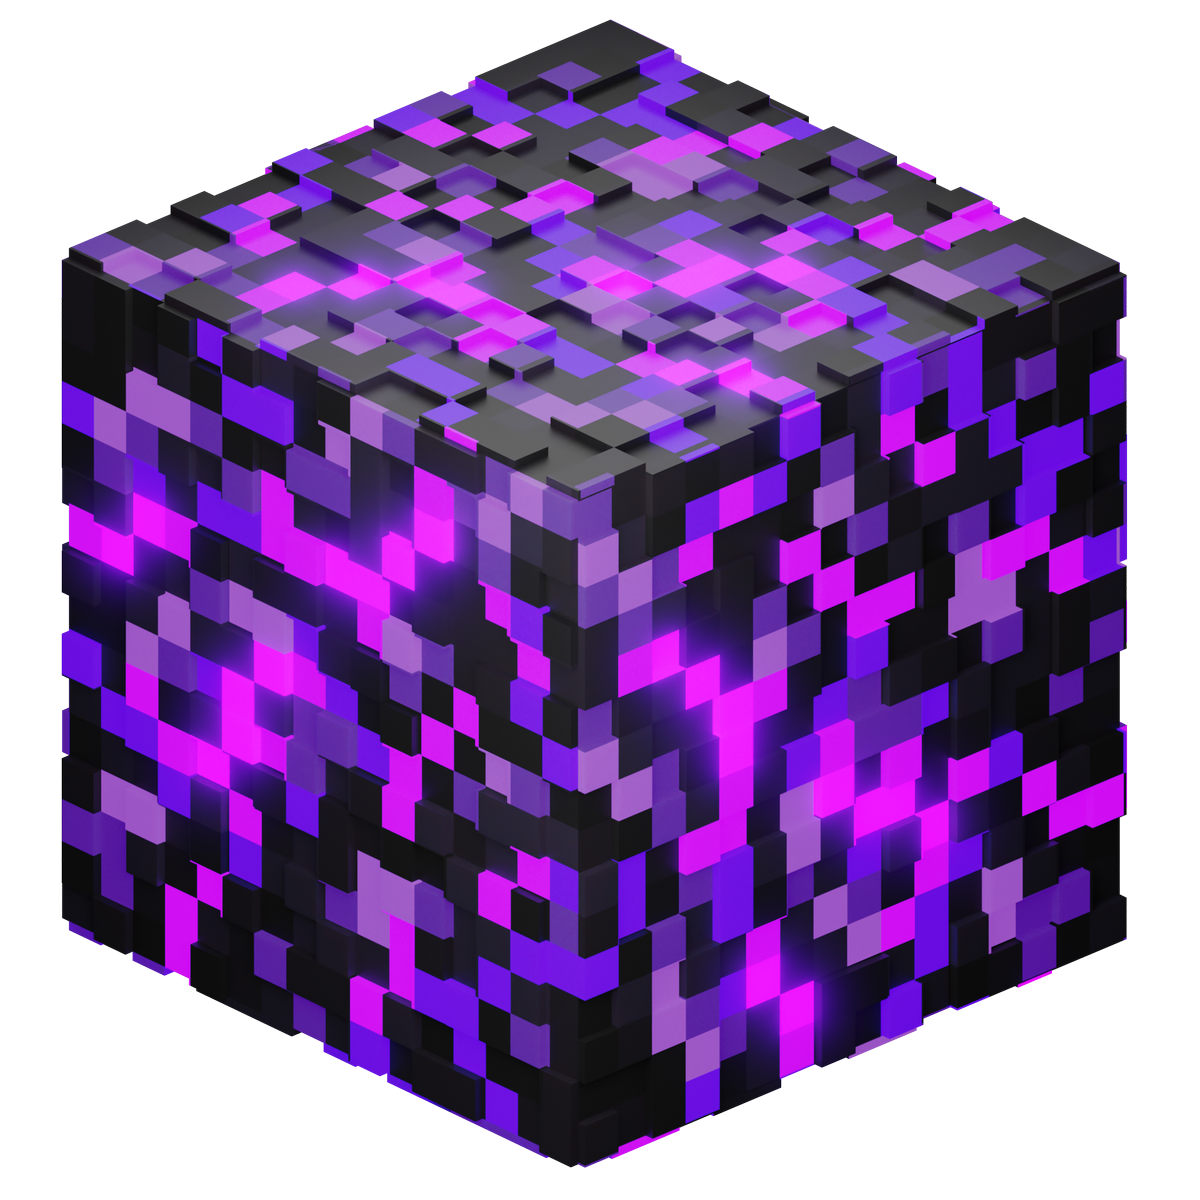 Hans On Twitter I Remade The Block Crying Obsidian From Minecraft Blender3d Minecraft - how to find all obsidian blocks in roblox hmm no longer works